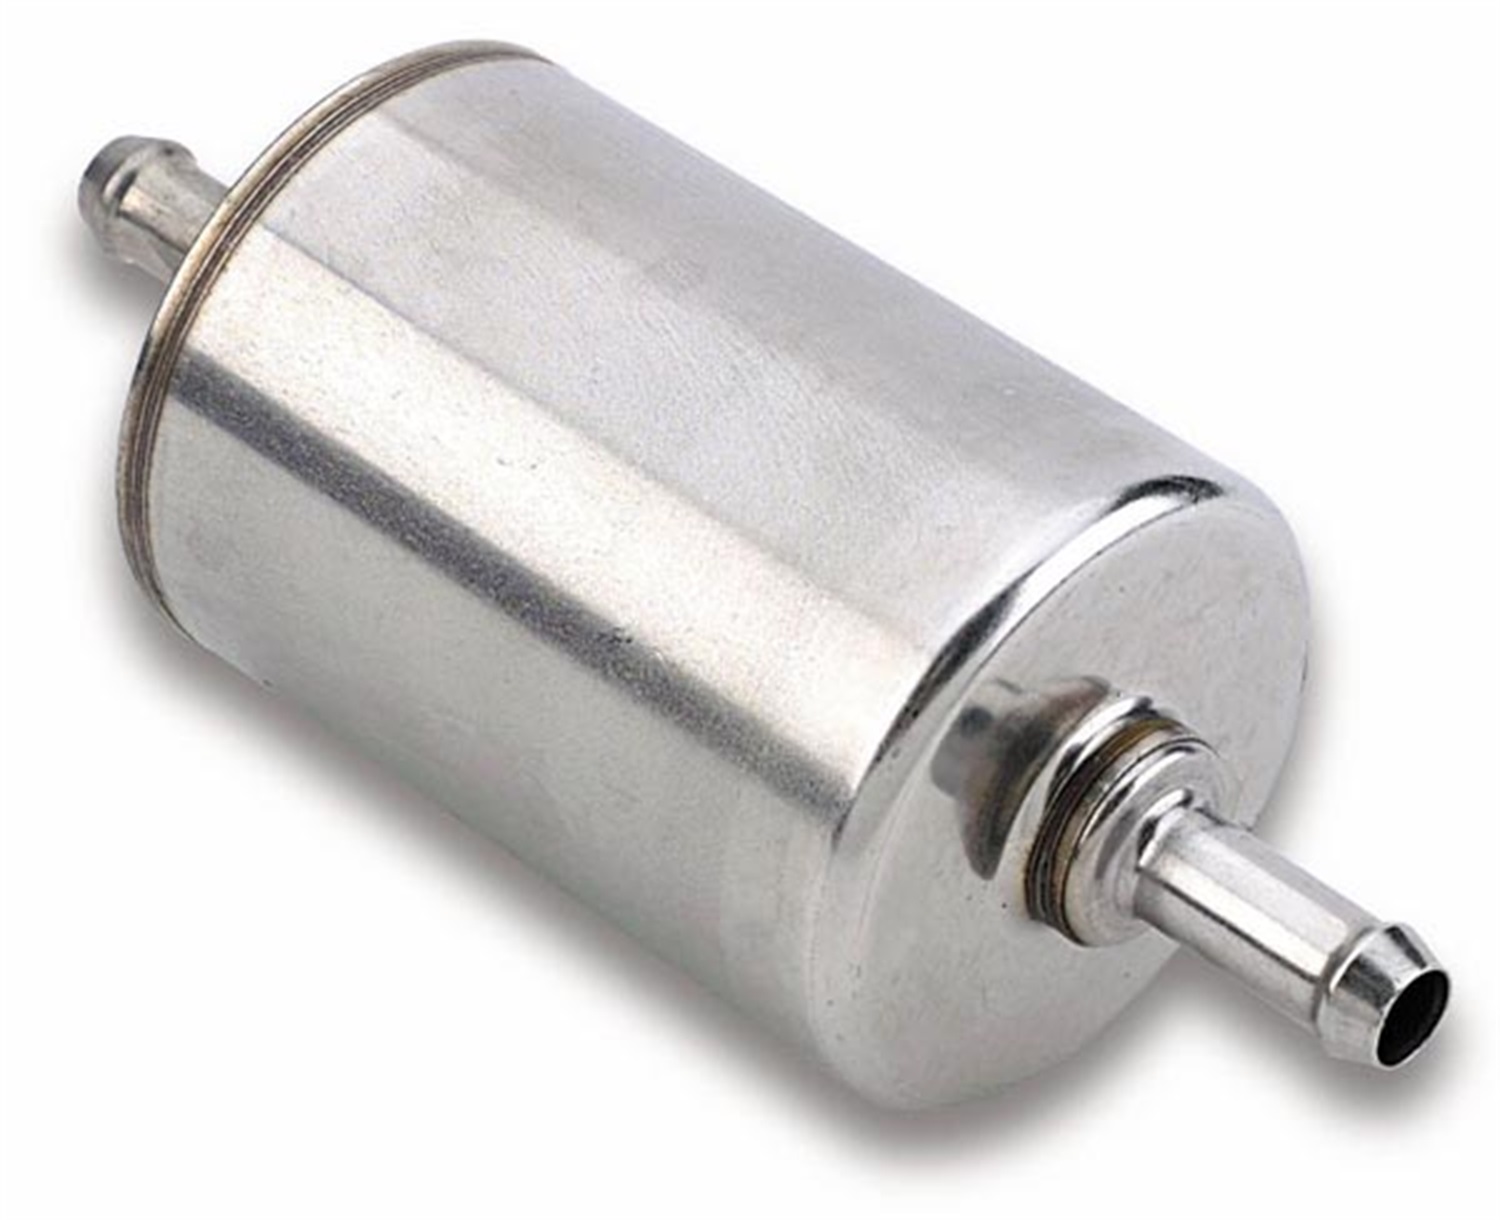 Holley Performance Holley Performance 562-1 Fuel Filter